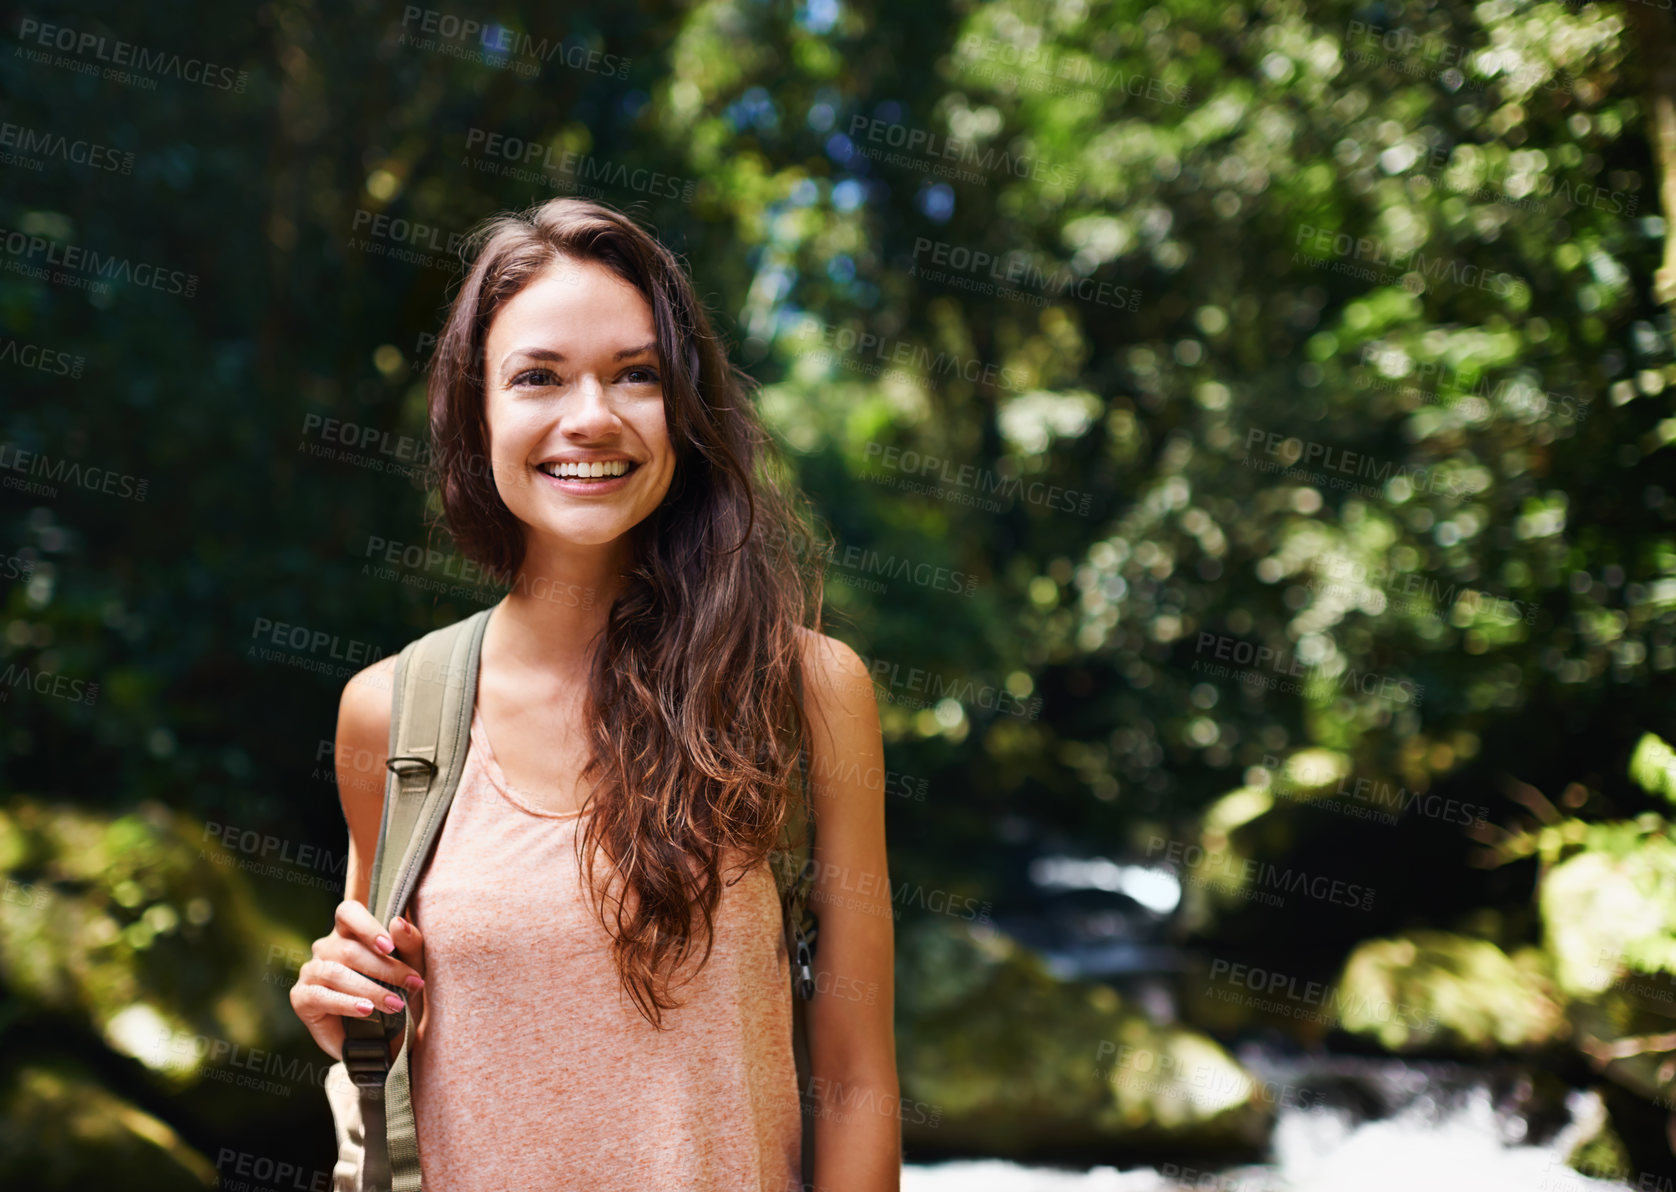 Buy stock photo Hiking, forest or happy woman with smile in nature or wilderness for a trekking adventure. Relax, bag or excited female hiker walking in a natural park or woods for exercise or wellness on holiday